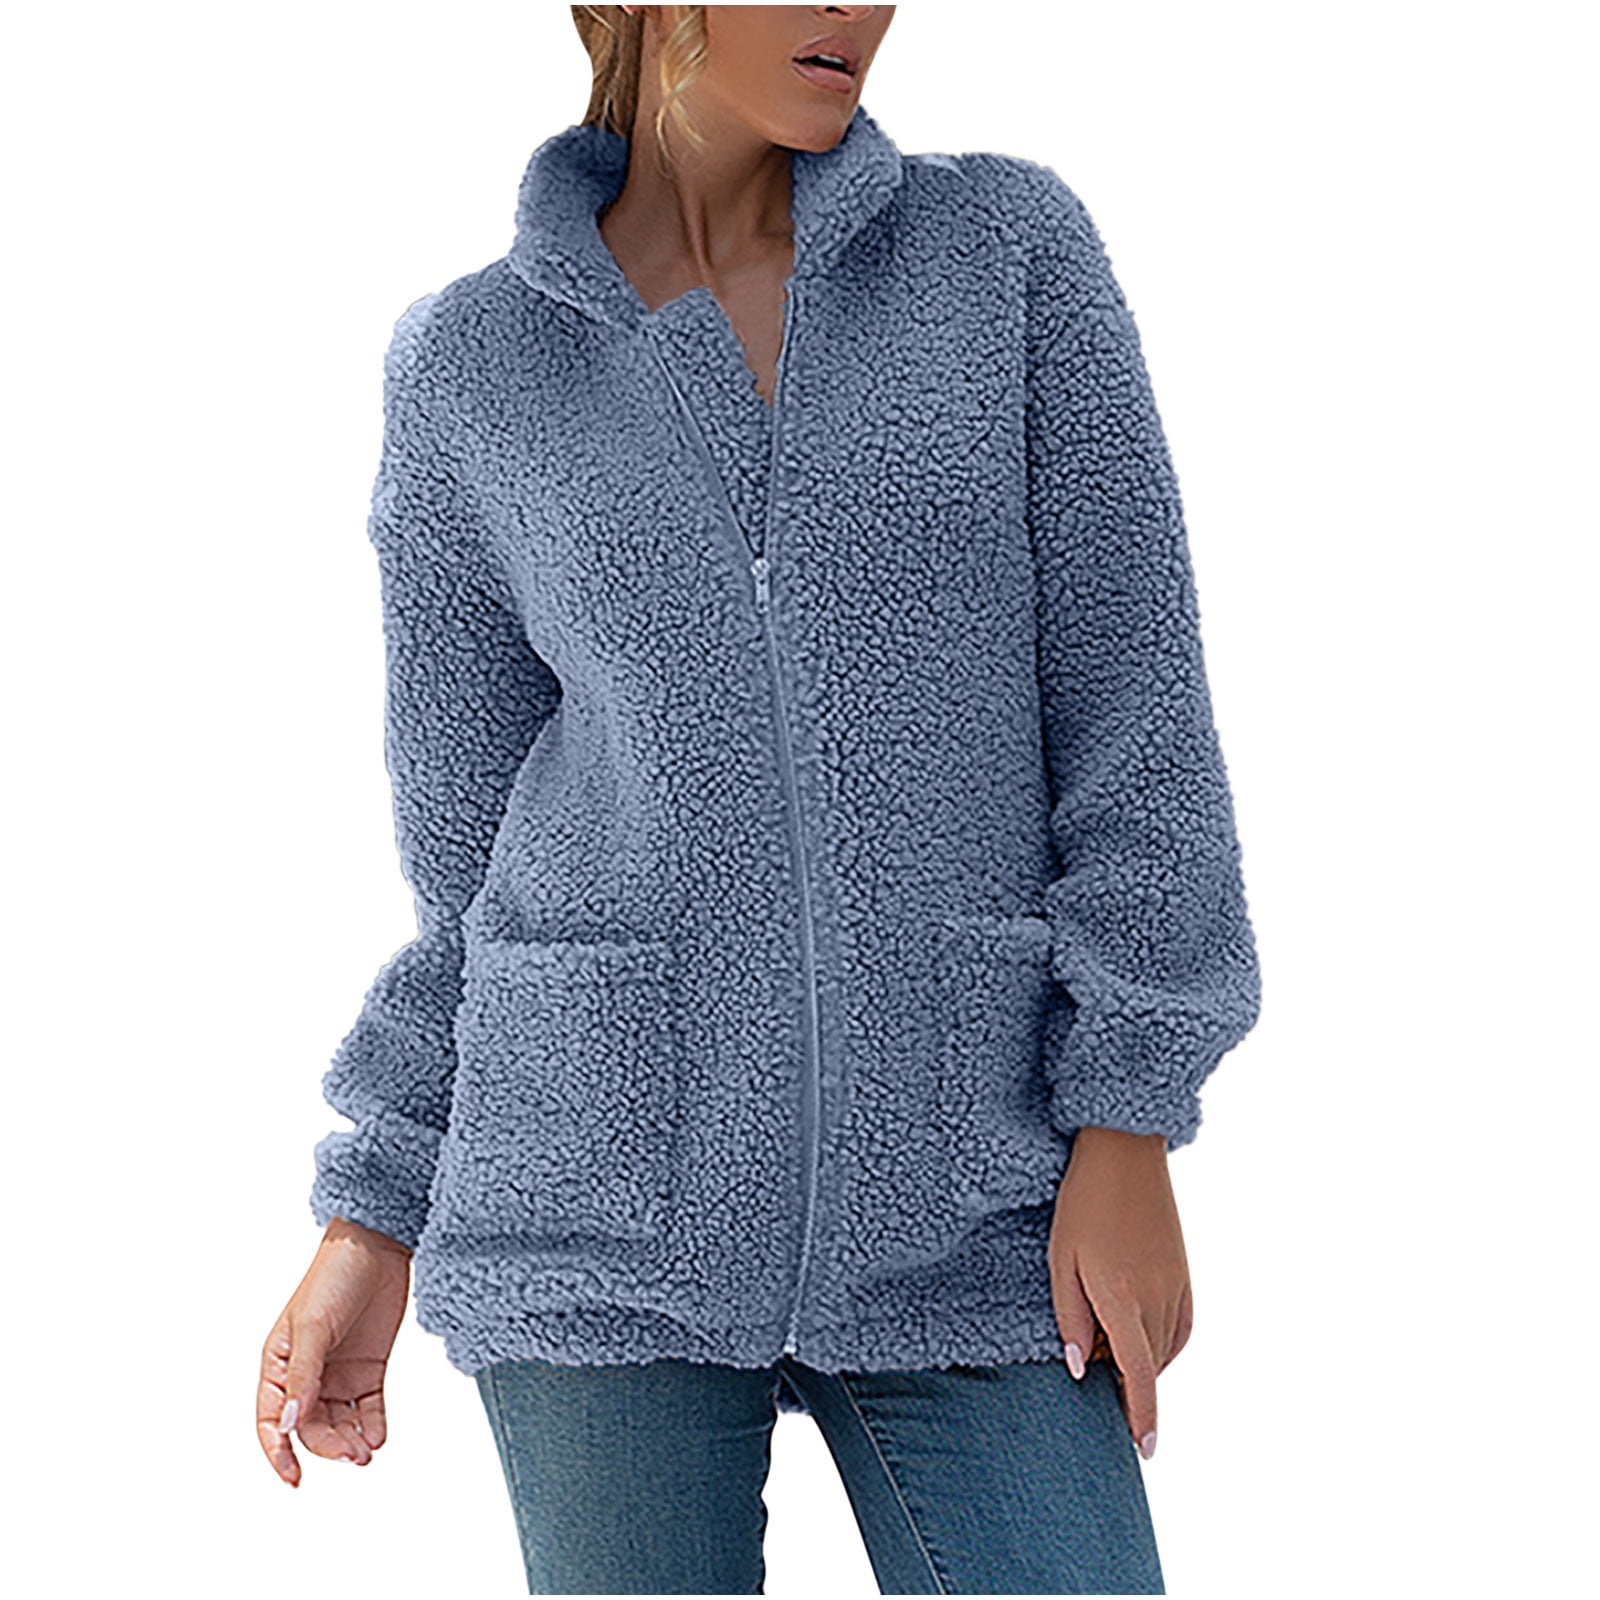 Fall Savings Clearance Deals ! BVnarty Women's Top Plush Zipeer Coat Pocket  Lightweight Solid Color Lapel Long Sleeve Winter Fashion Top Shacket Jacket  Casual Plus Size for Mujer Light Blue XXXL 